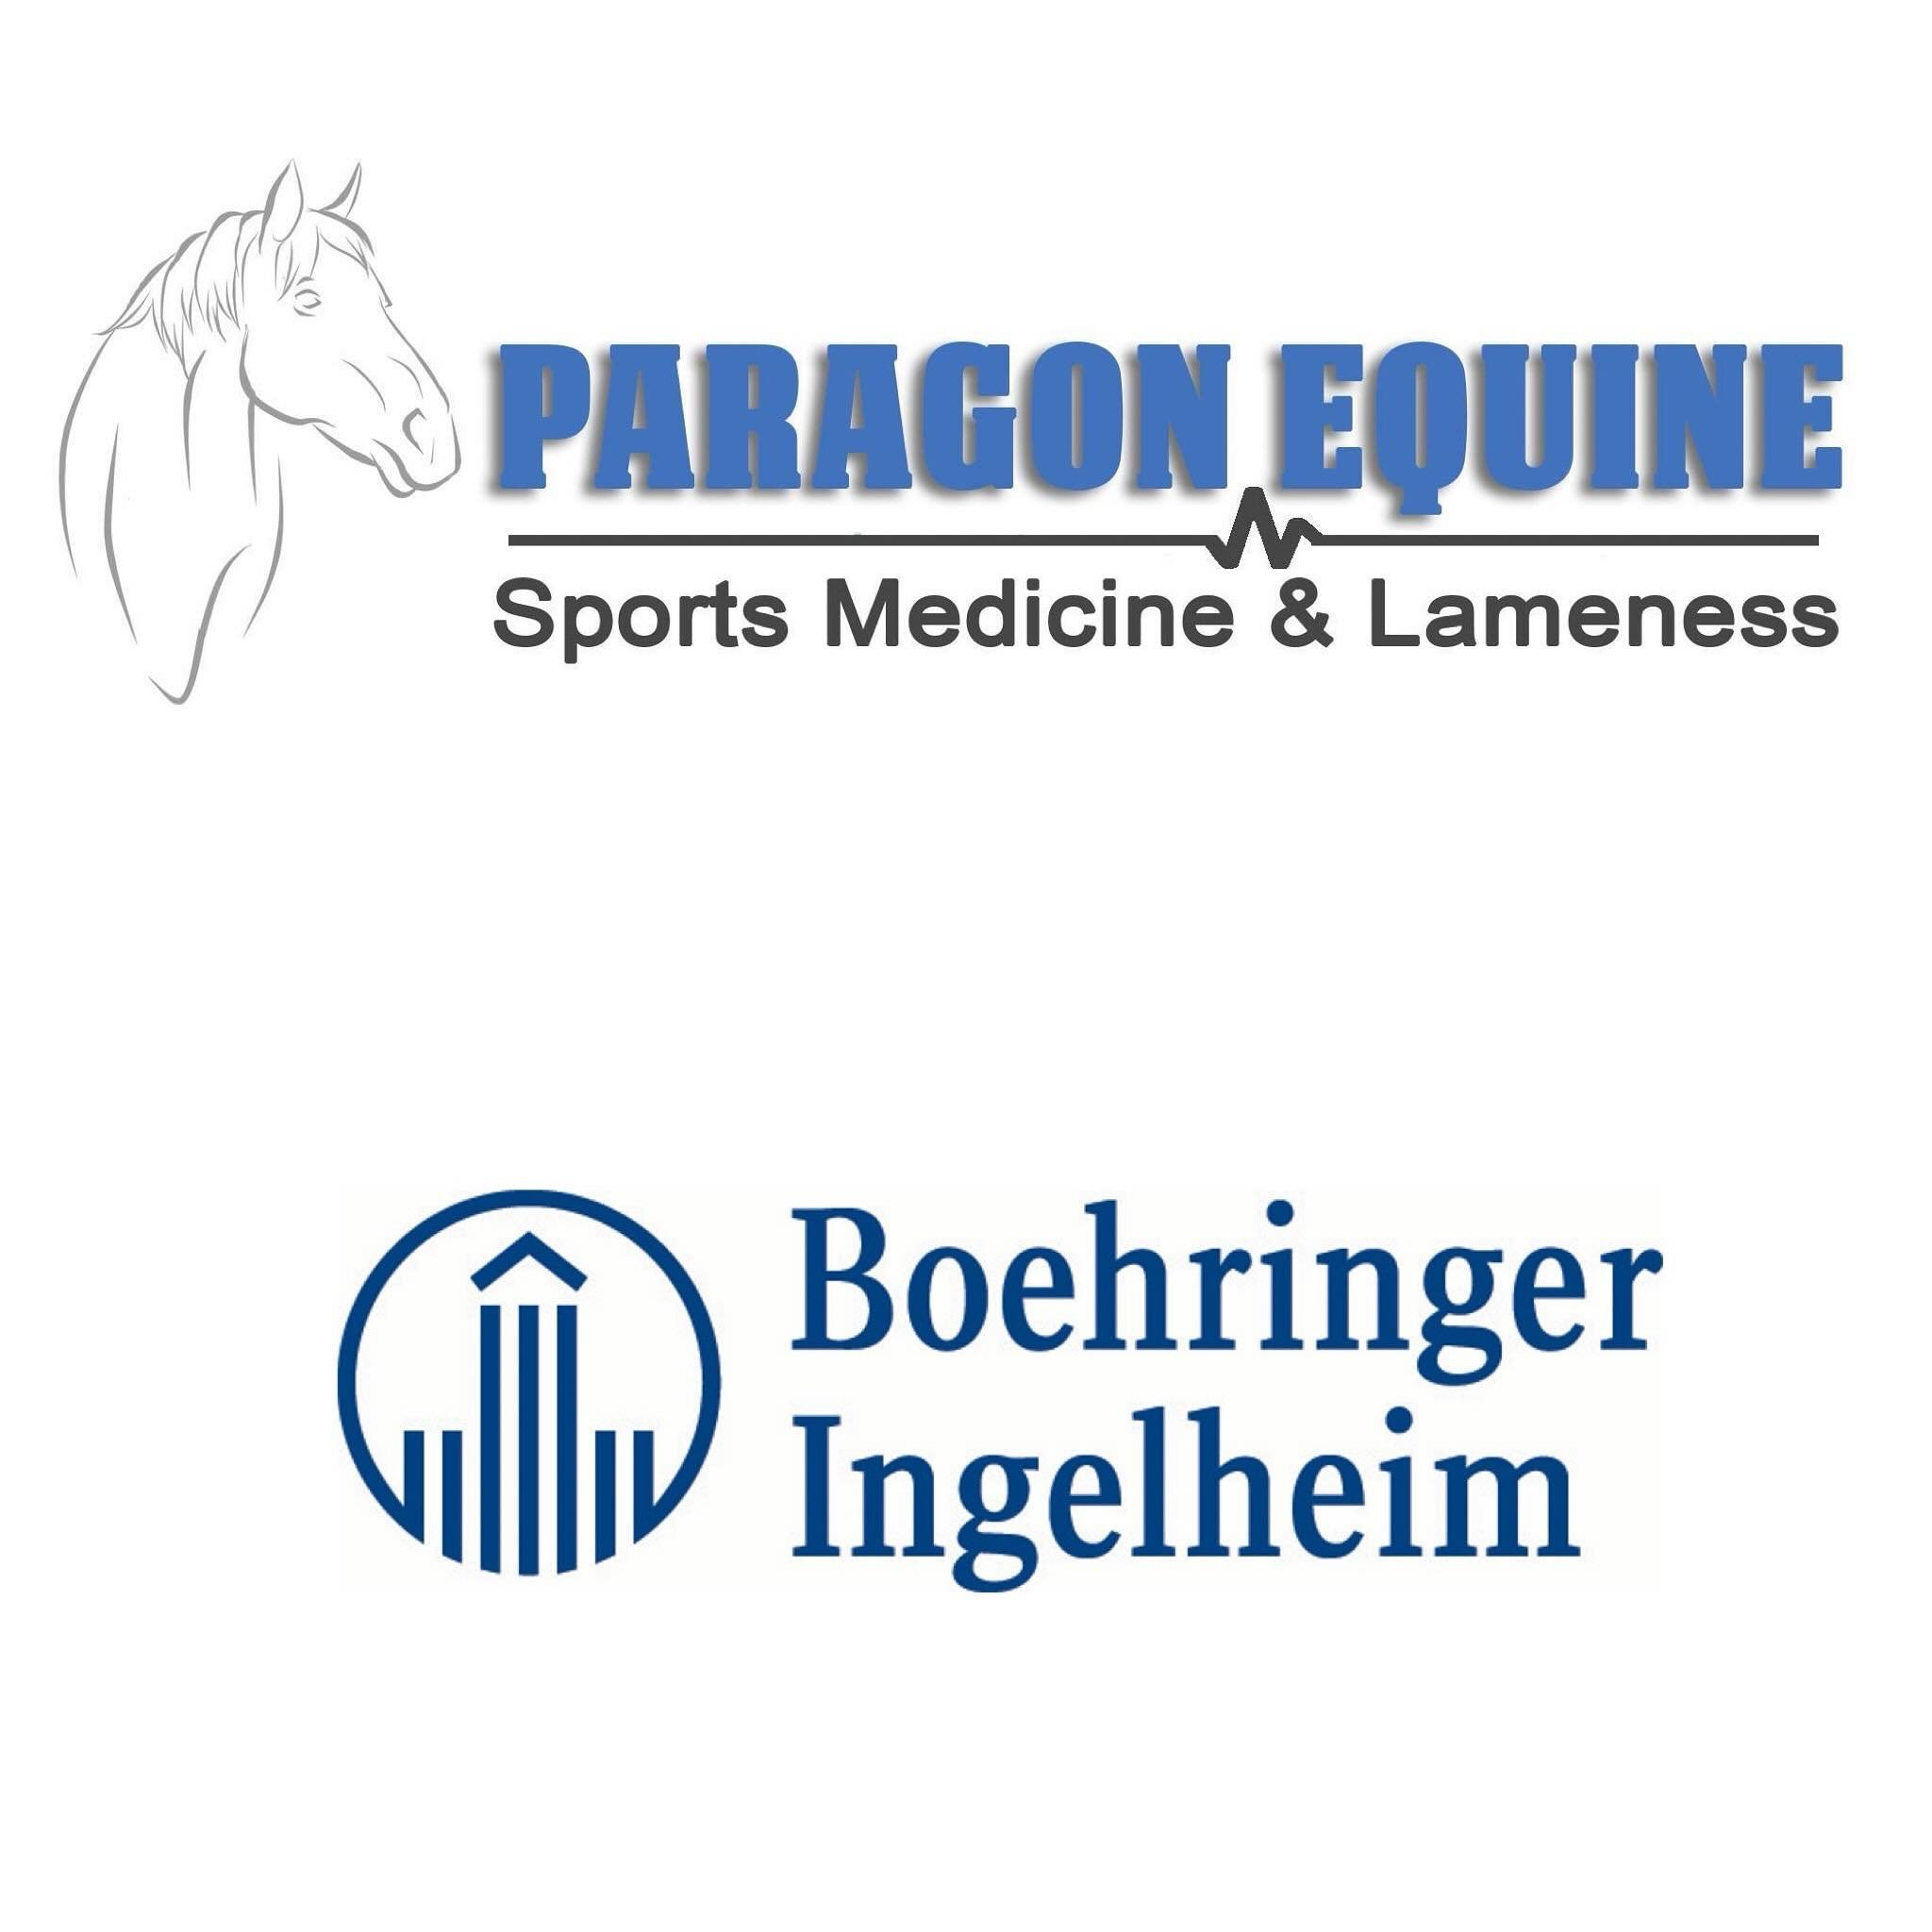 ✨ SPONSOR SPOTLIGHT ✨ Huge thank you to @paragonequine for their sponsorship of the Beginner Novice division! All division winners will receive a Paragon Equine Bag with OVER $400 worth of @boehringer_ingelheim products. Dr. Lundgreen has supported S